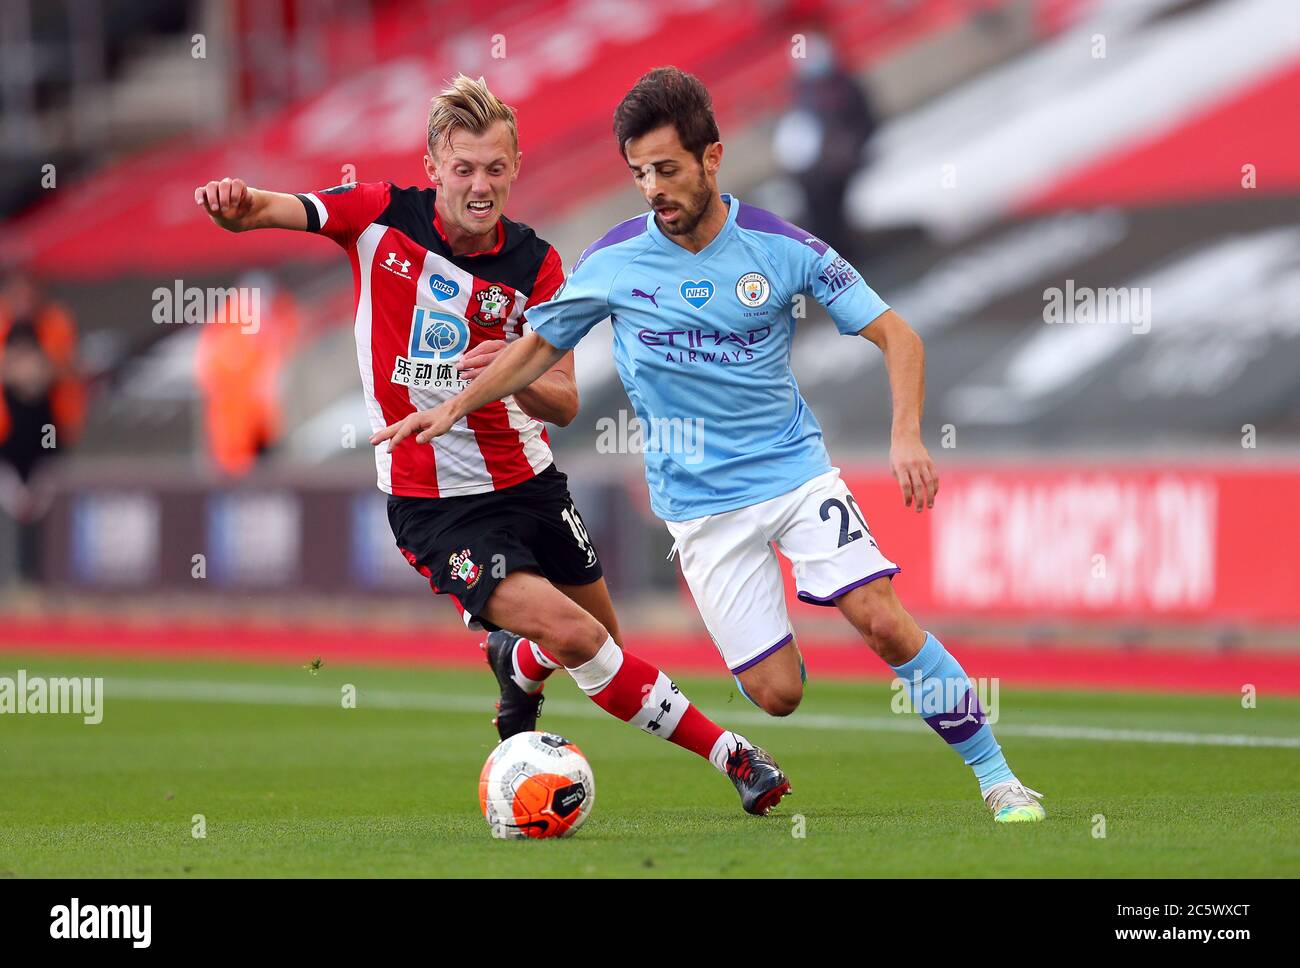 Southampton's James Ward-Prowse and Manchester City's Bernardo Silva (right) battle for the ball during the Premier League match at St Mary's Stadium, Southampton. Stock Photo